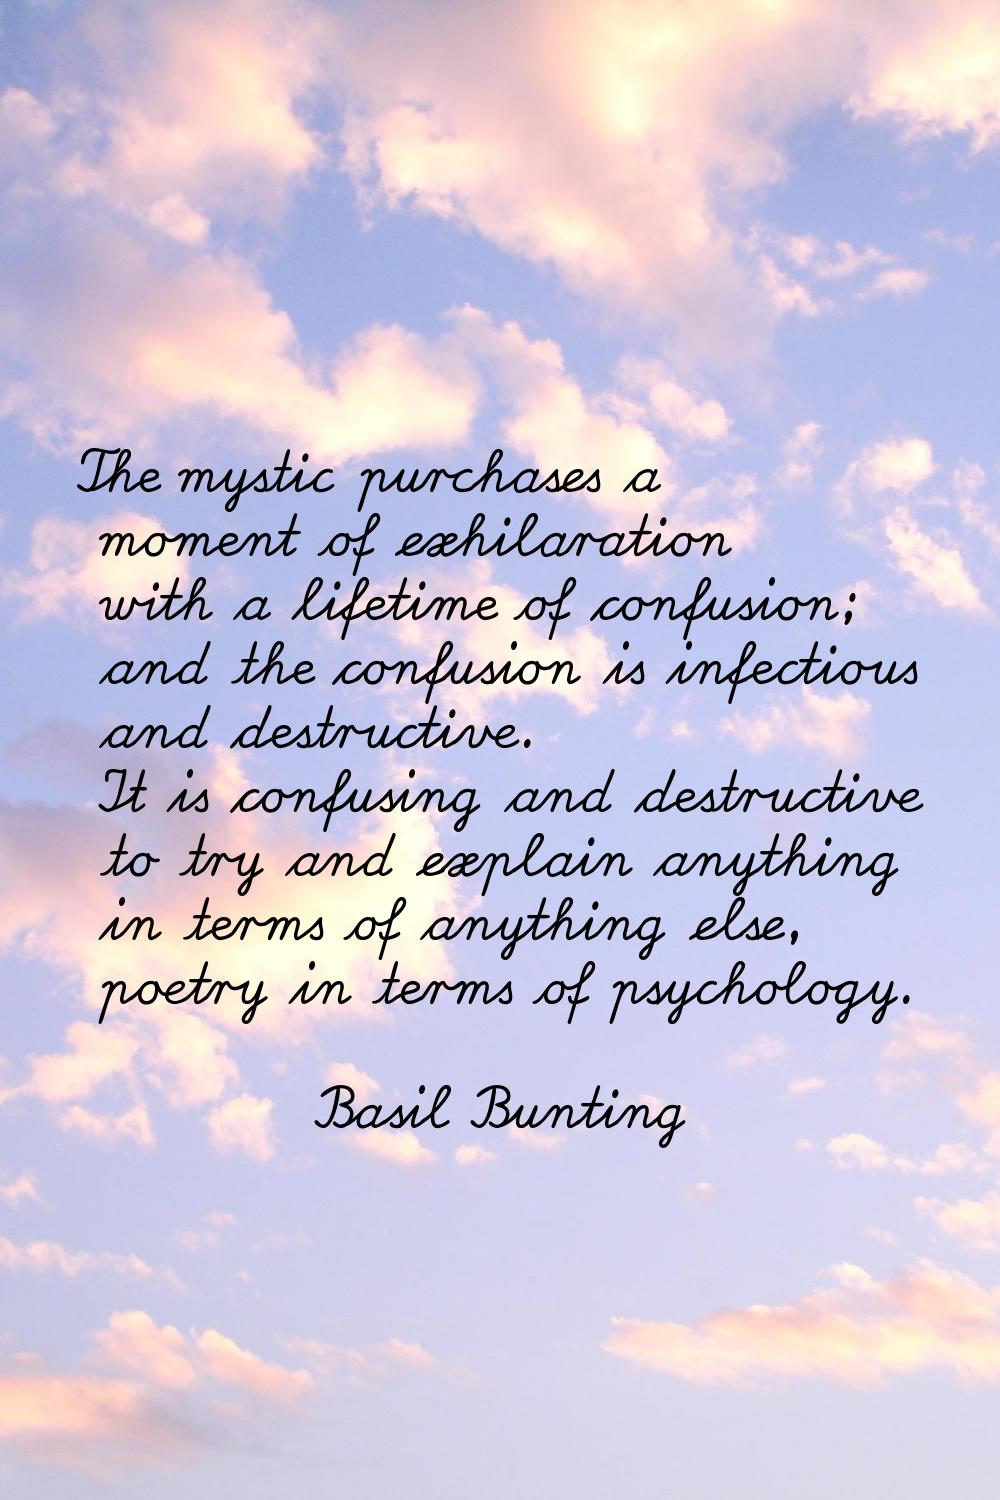 The mystic purchases a moment of exhilaration with a lifetime of confusion; and the confusion is in